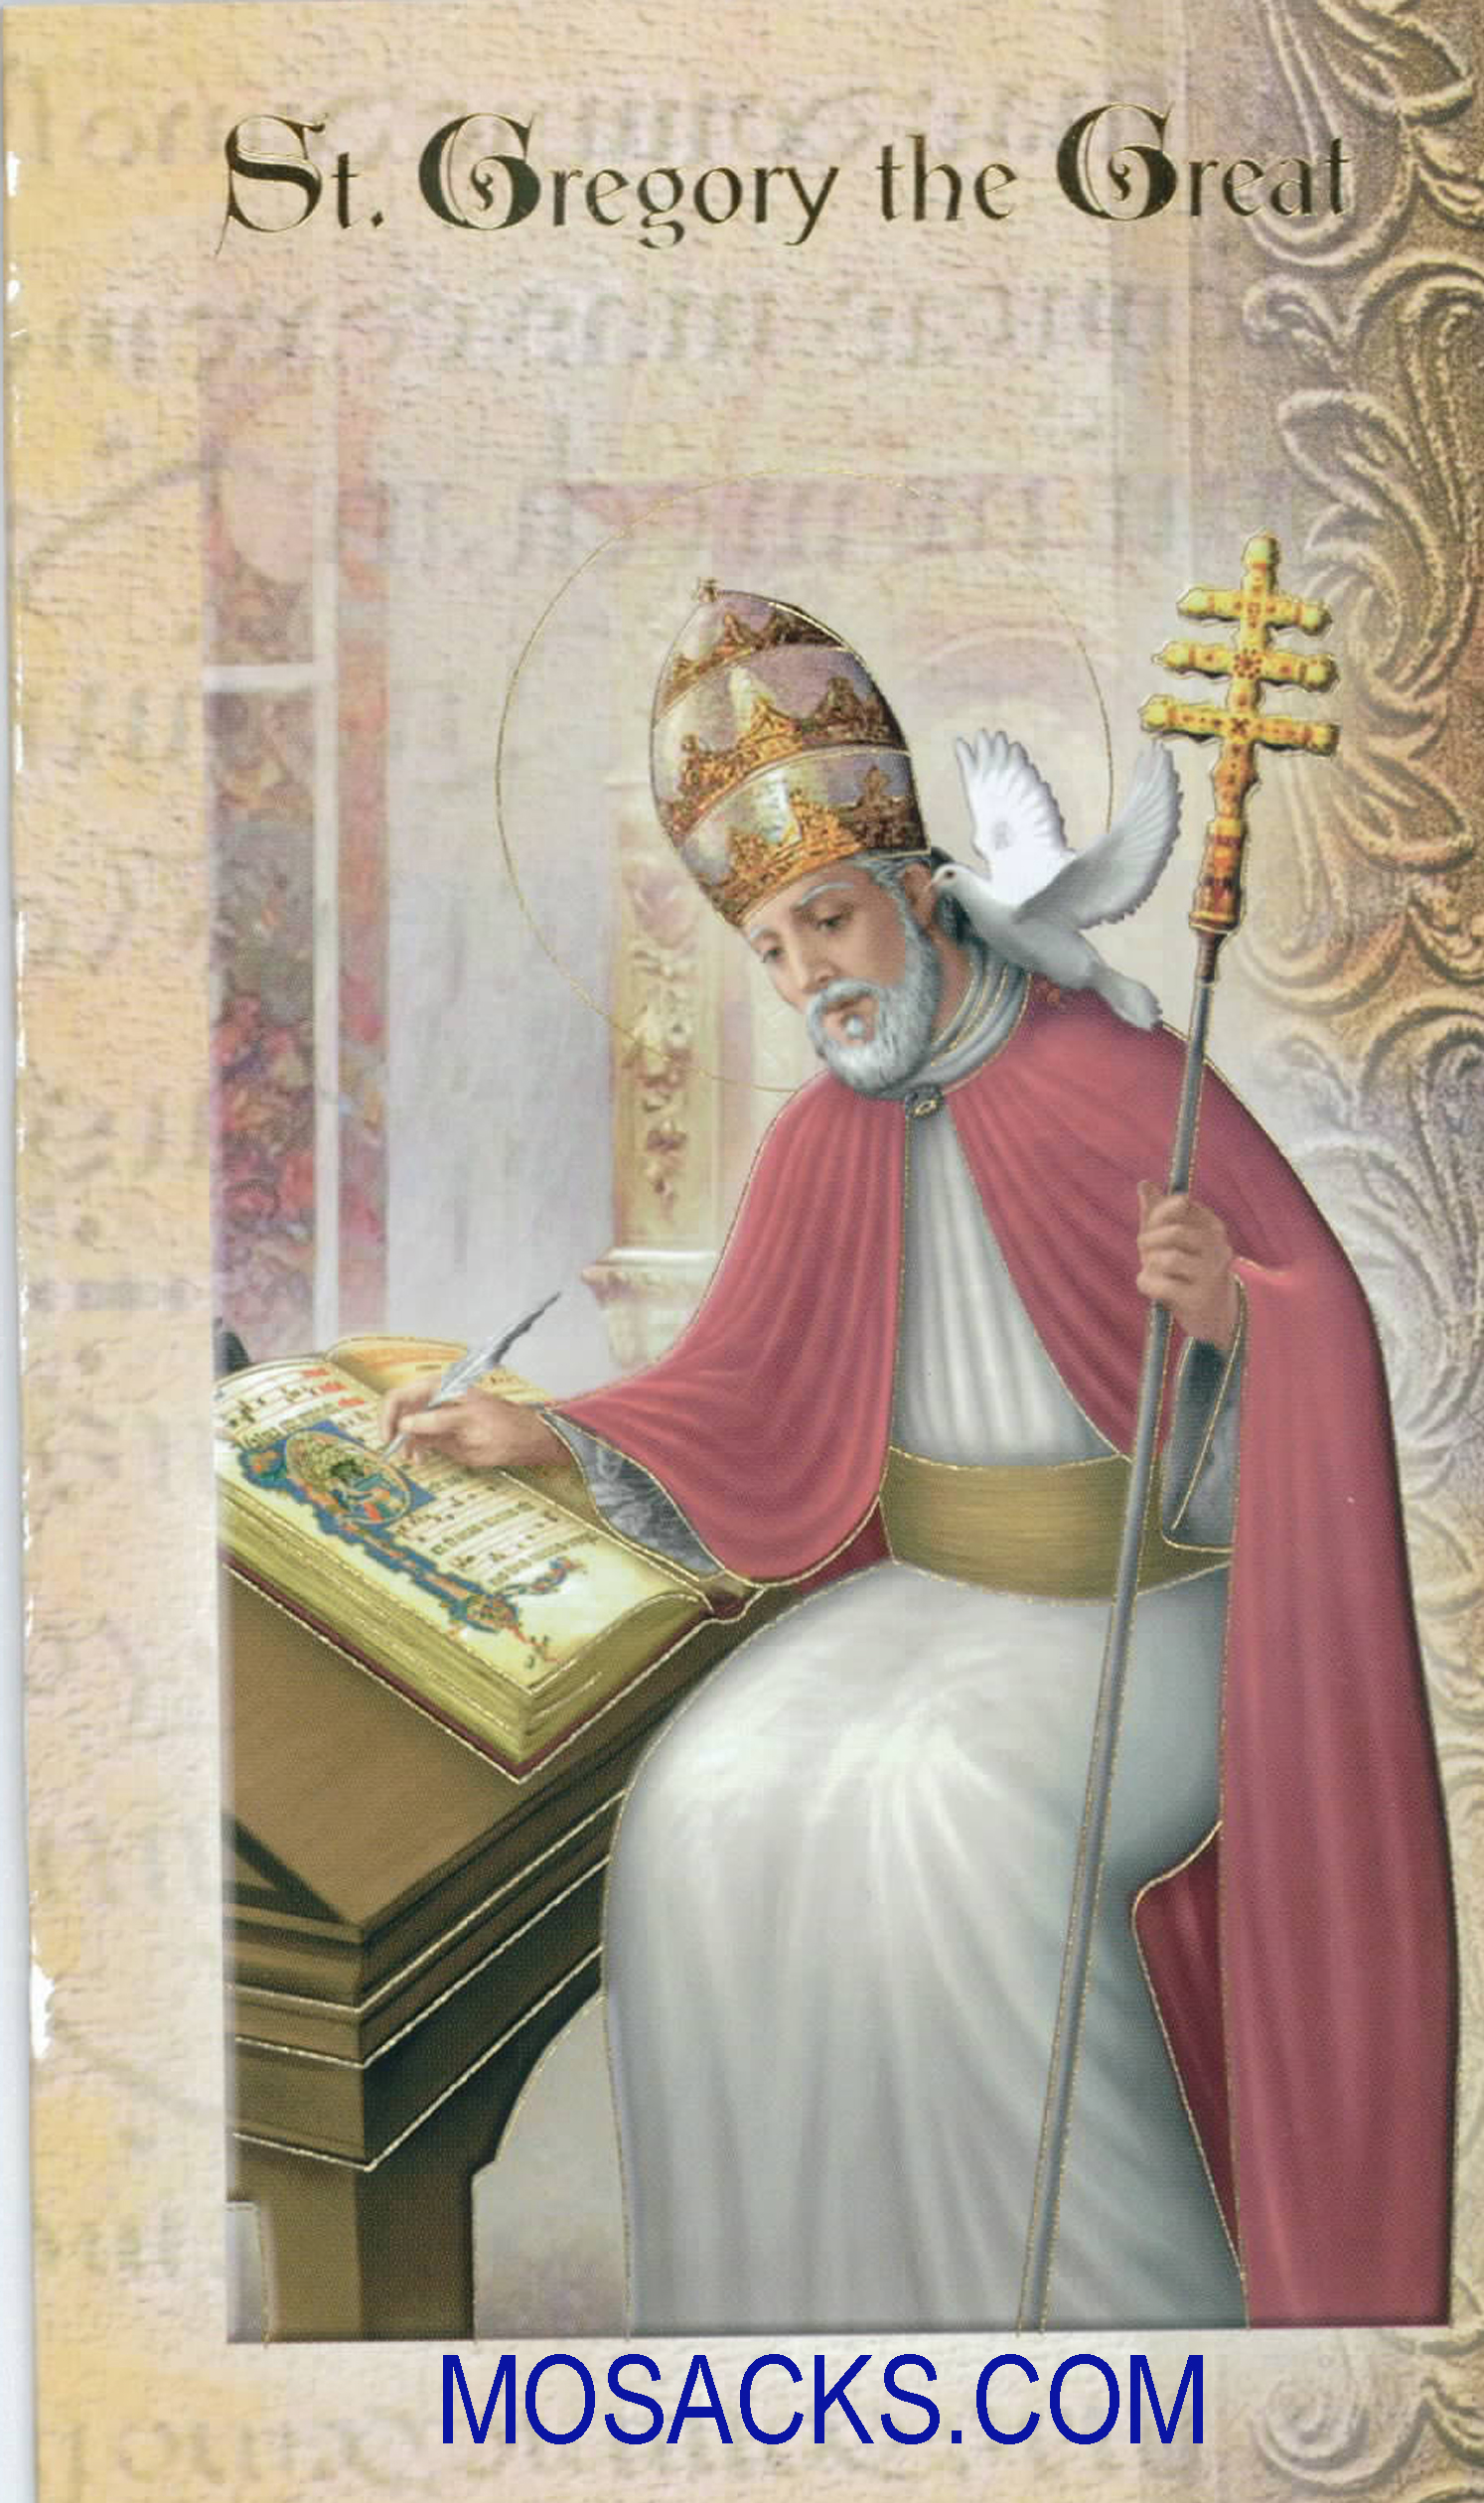 St. Gregory the Great Bi-fold Holy Card, F5-443